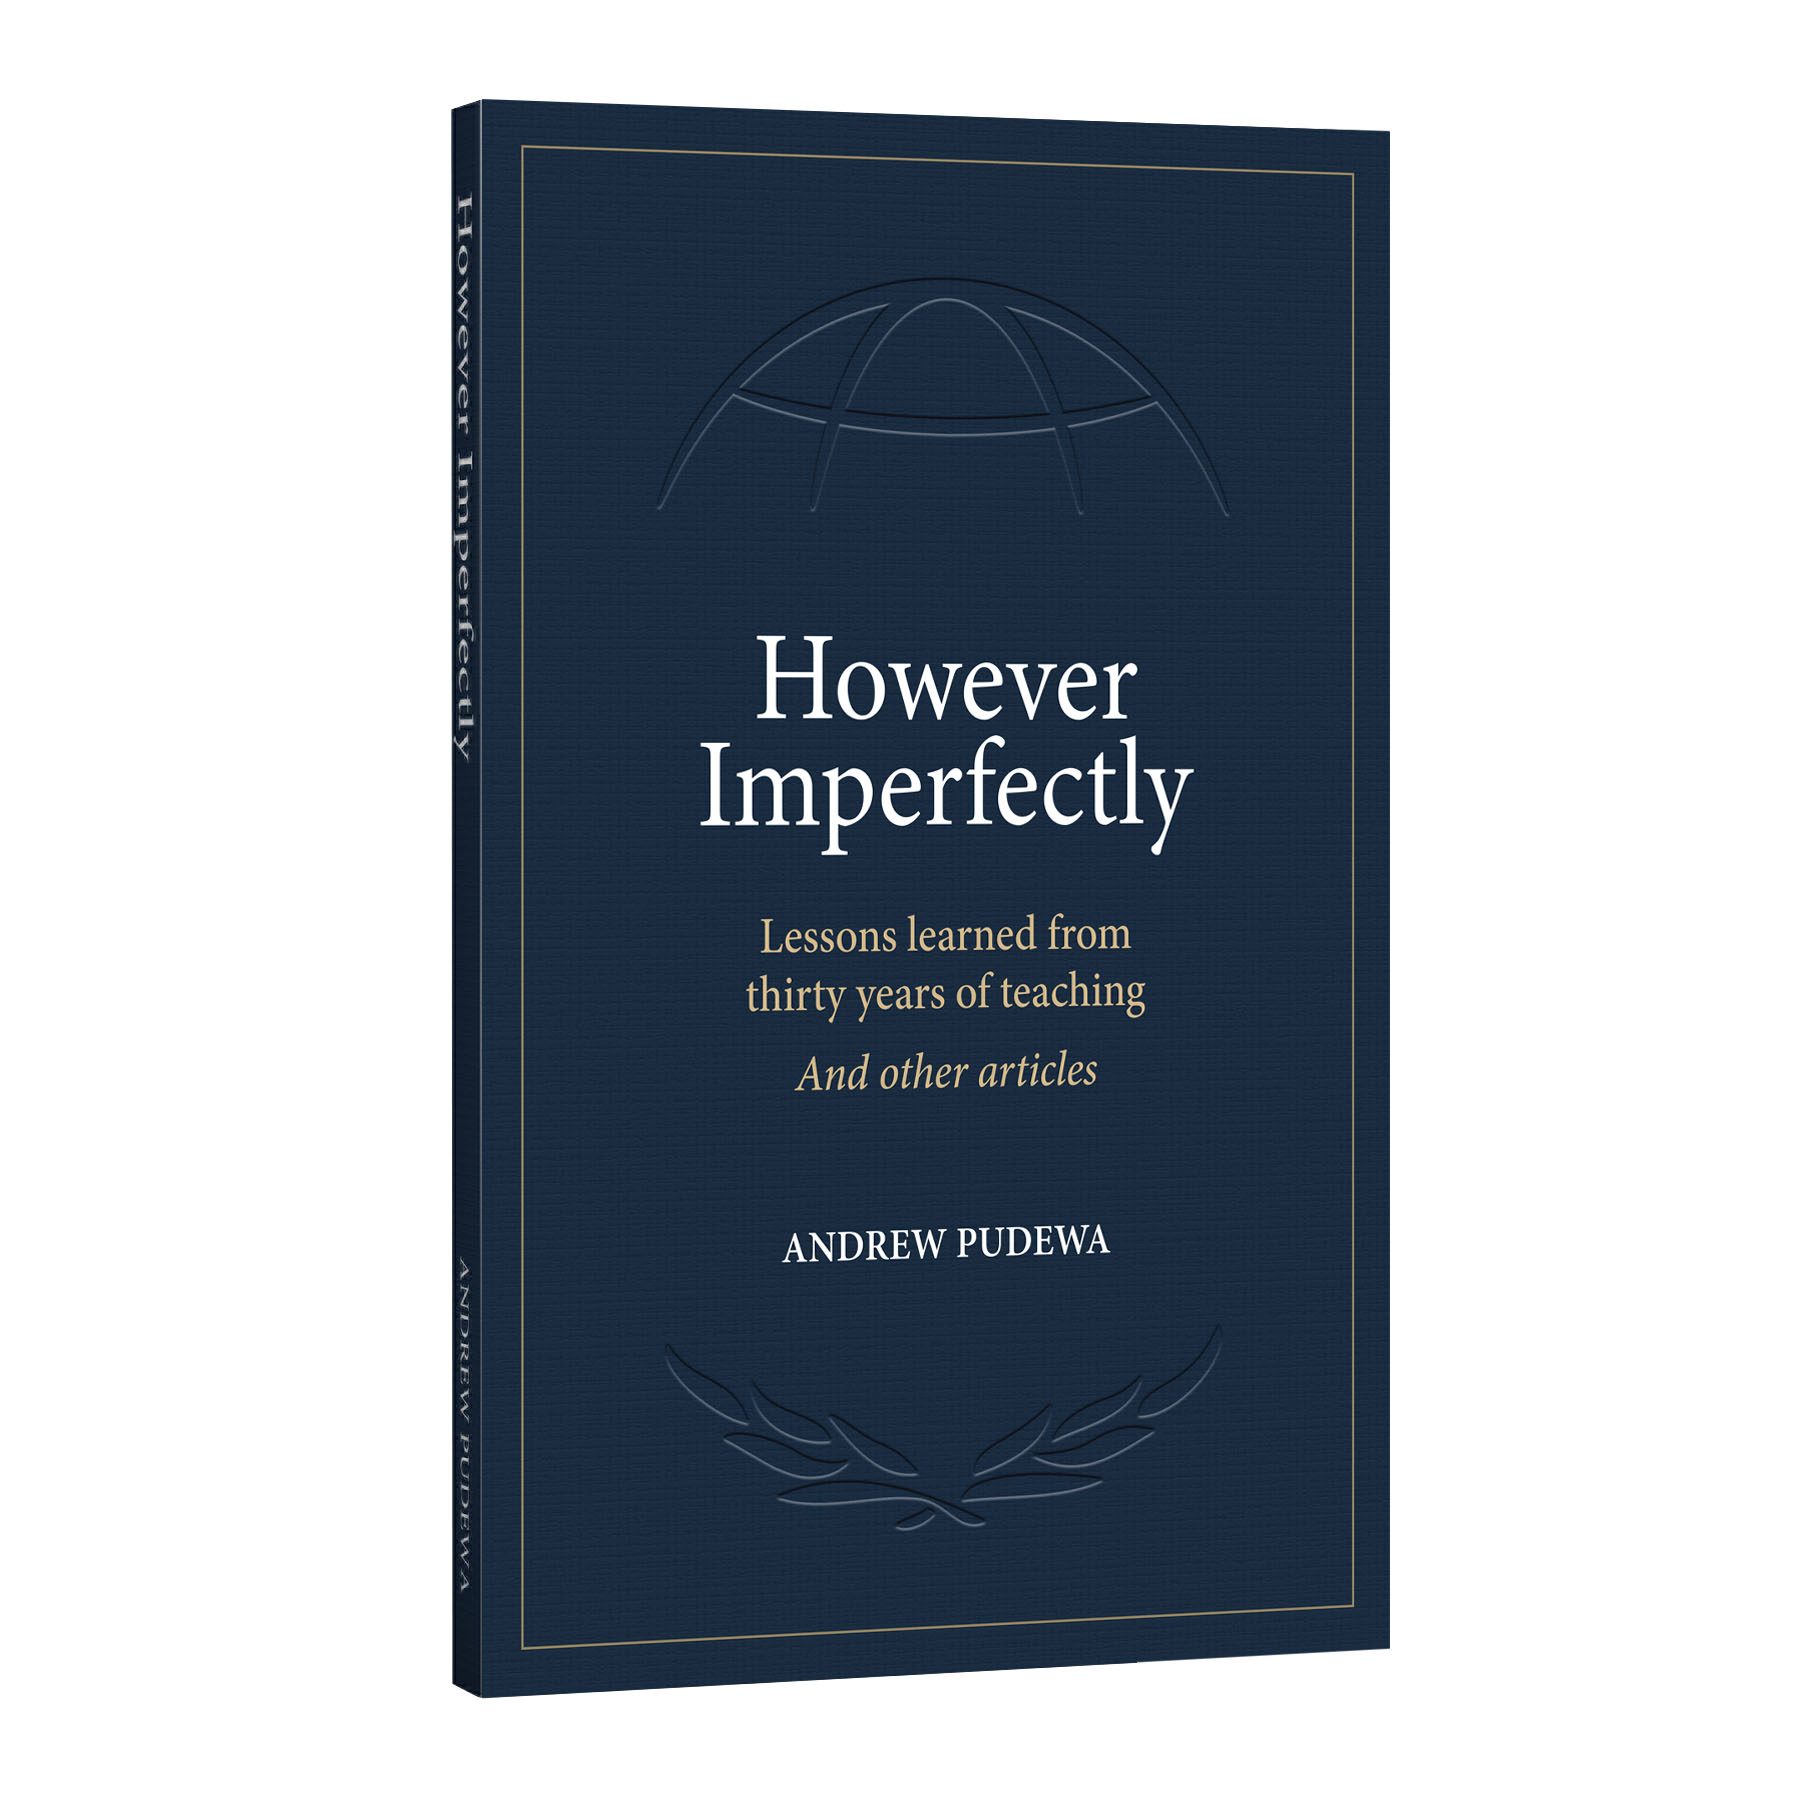 However Imperfectly [Book/Streaming Combo]